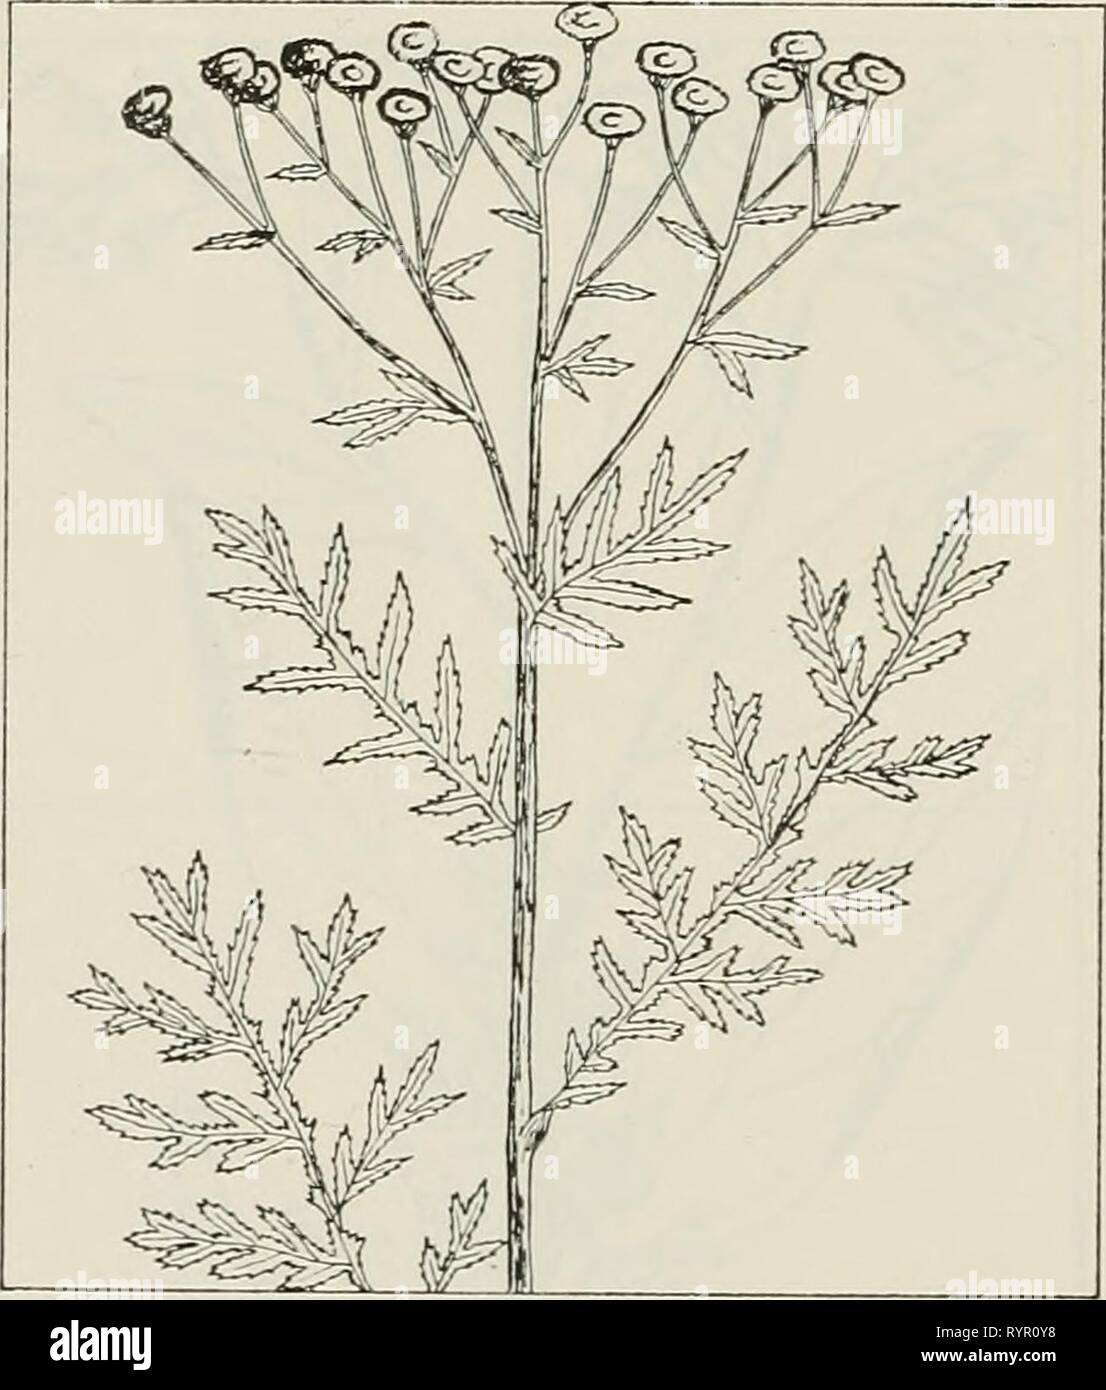 The drug plants of Illinois The drug plants of Illinois . drugplantsofilli44teho Year: 1951  1 10 ILLINOIS NATURAL HISTORY SURVEY Circular 44 Aff /Yiv^ 1 ^/^^ // 11/x'Ml /V^ / ' wl7 ? tmS/ SYMPLOCARPUS FOETIDUS (L.) Nutt. Skunk cabbage, skunk weed, polecat weed, fetid hellebore. Araceae. —A stemless, offensive-smelling plant 1 to 3 feet tall, perennial; rootstock thick; straight, descending, with whorls of fleshy fibers; leaves 1 to 3 feet long, up to 1 foot wide, ovate, petioled, veiny; flowers minute, spiked inside a purple-brown to greenish, leaflike spathe, appearing before the leaves. Th Stock Photo